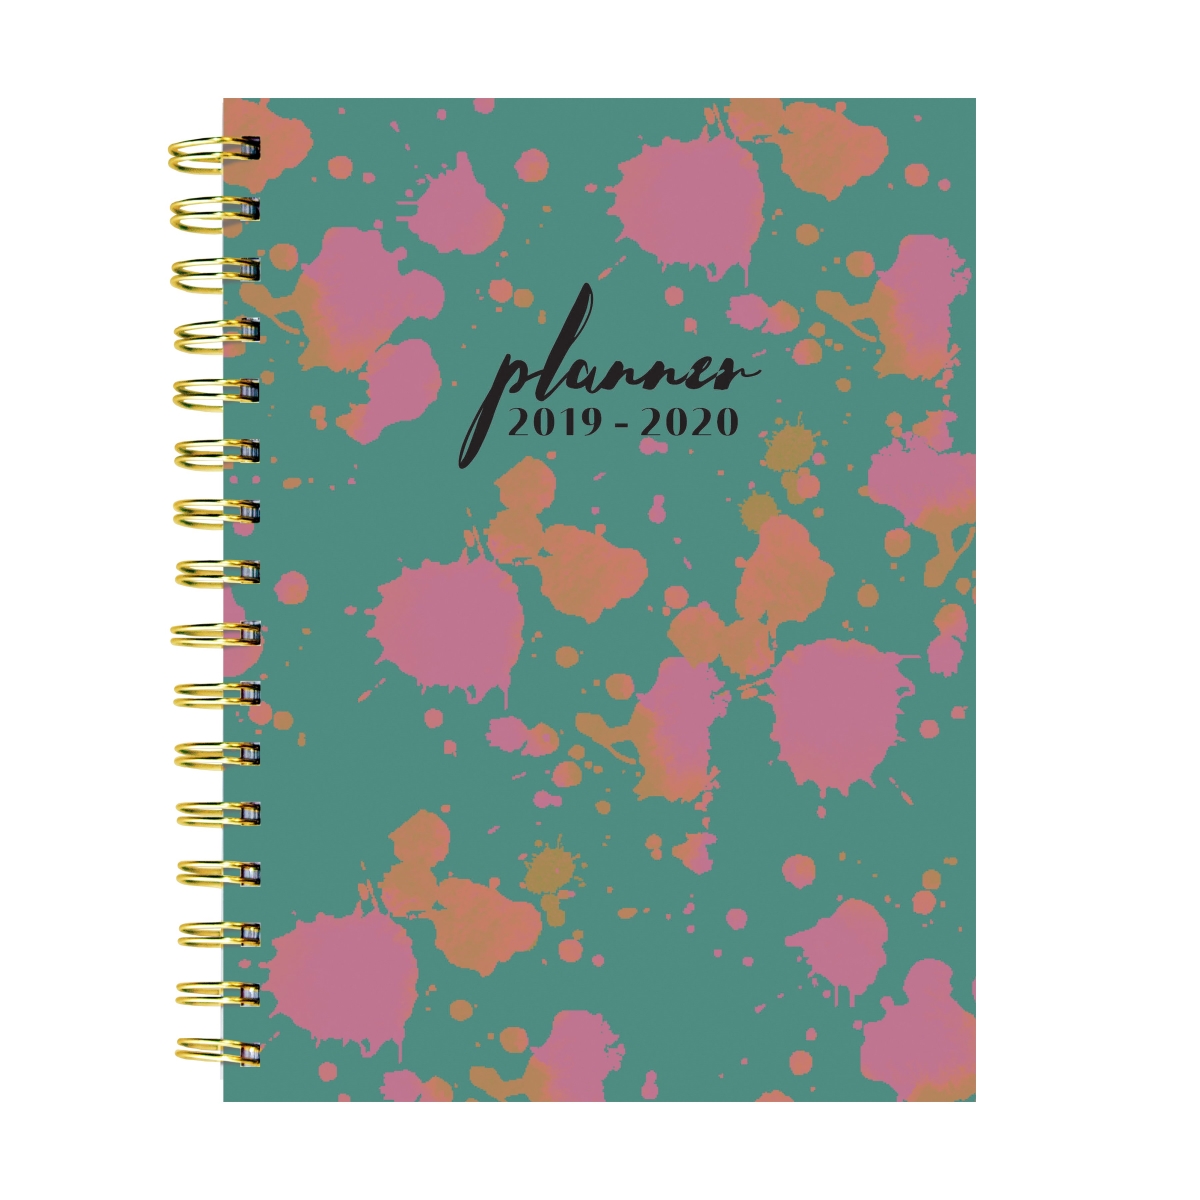 20-9264a July 2019 - June 2020 Paint Spots Medium Daily Weekly Monthly Planner